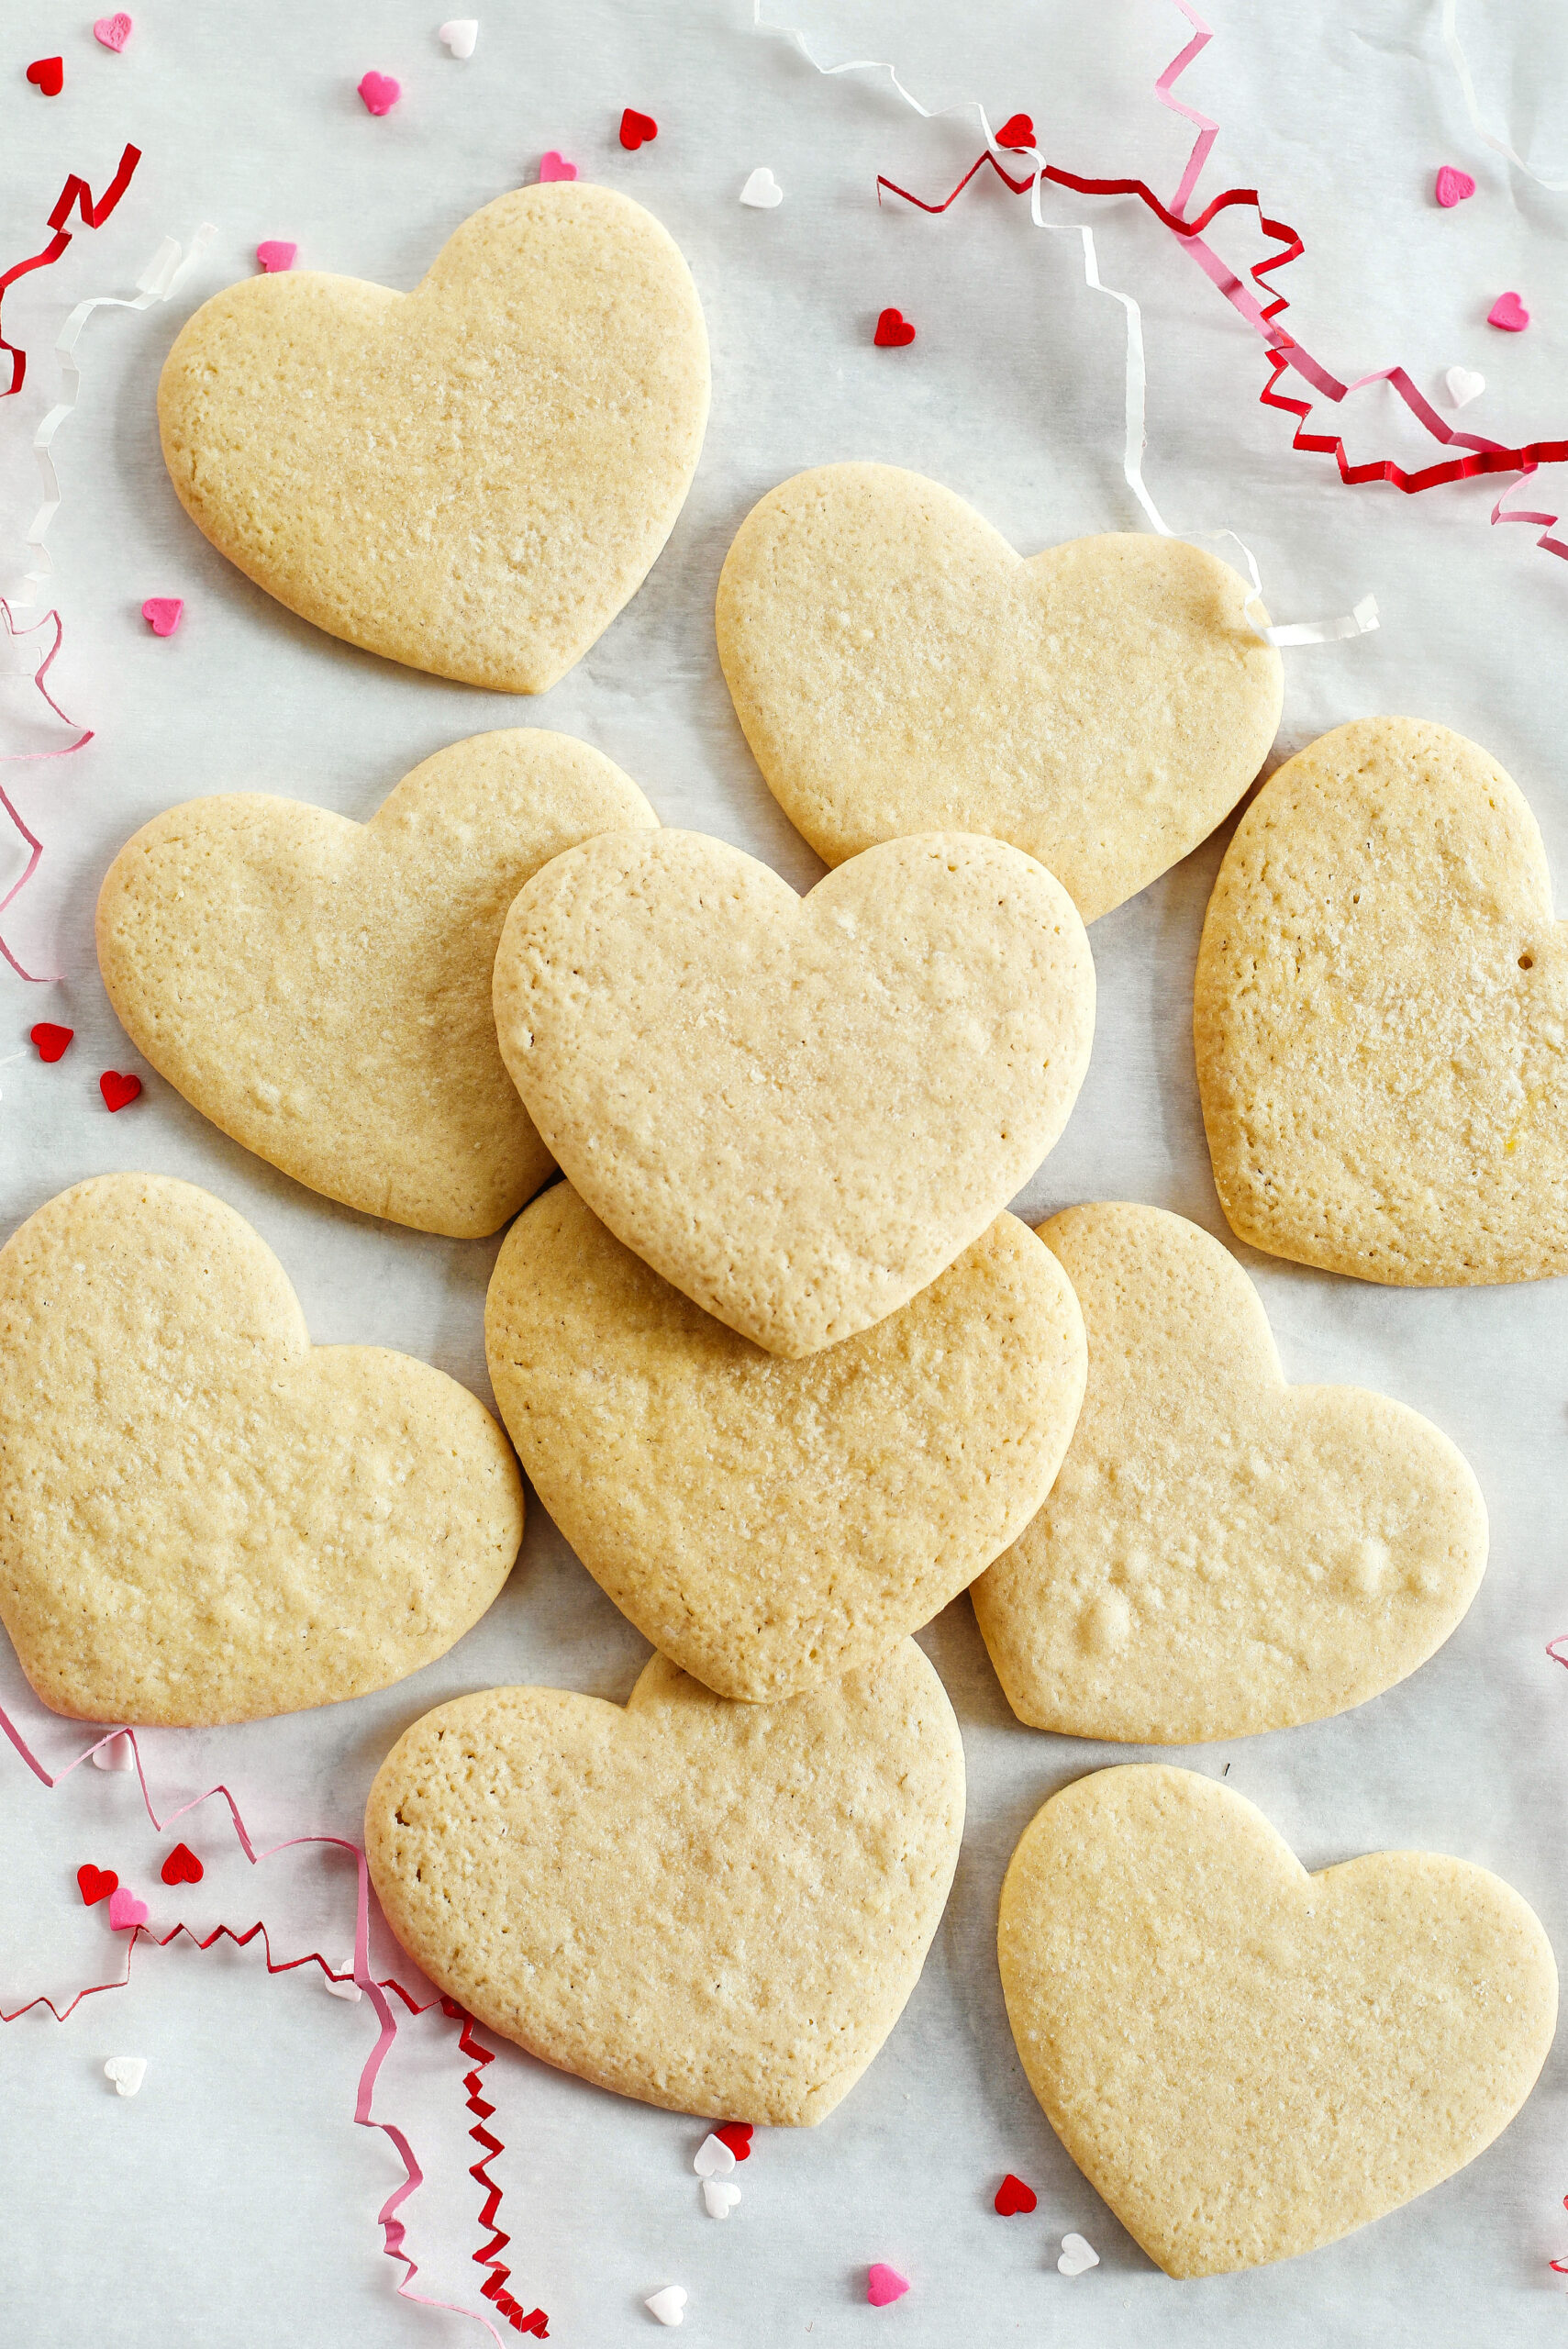 These Valentine's Day Grain-Free Sugar Cookies are soft on the inside and deliciously chewy on the outside!  Cut them into fun shapes and have fun decorating them for Valentine's Day!